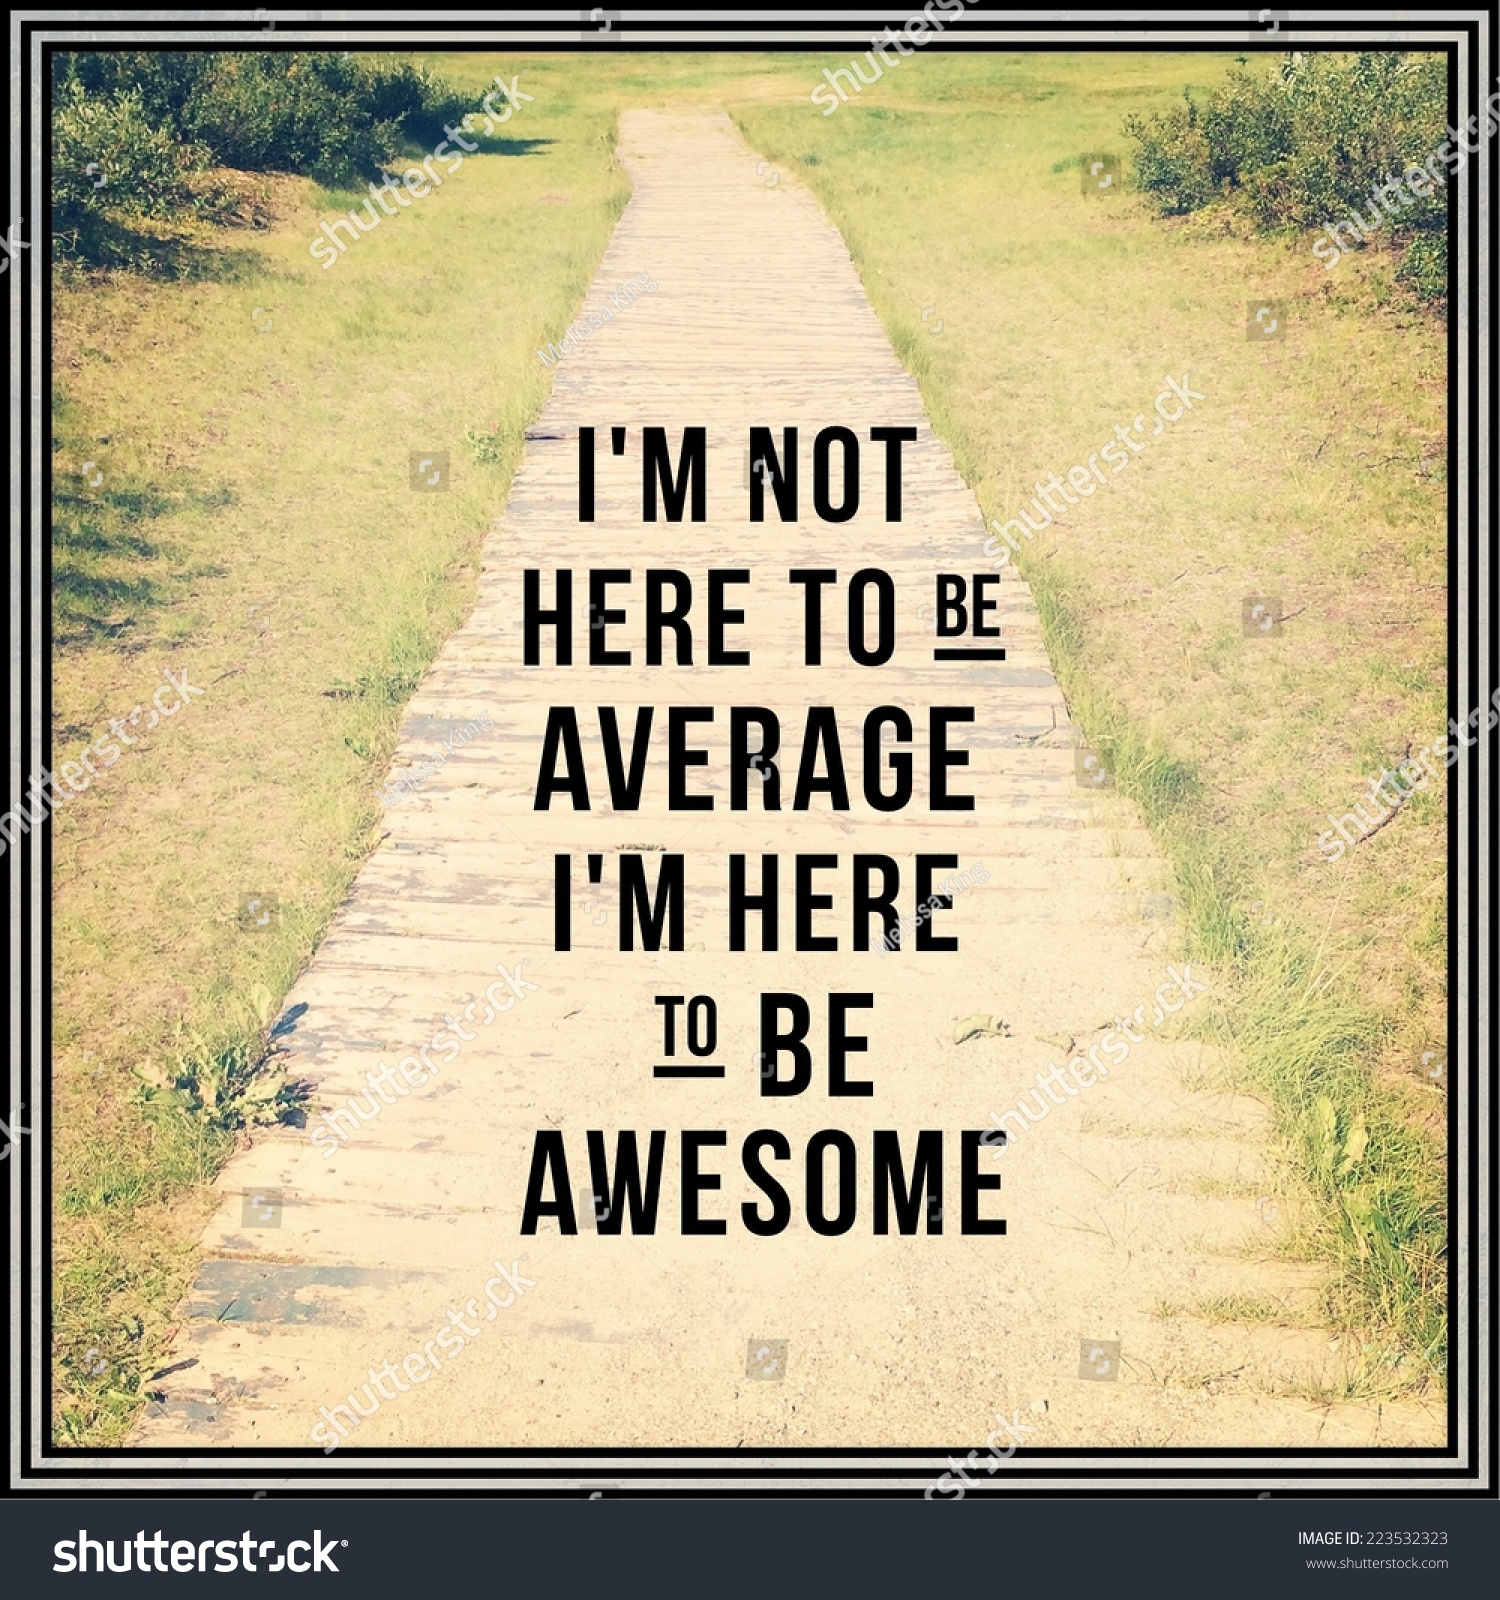 Inspirational Typographic Quote - I'm not here to be average i'm here to be awesome #223532323